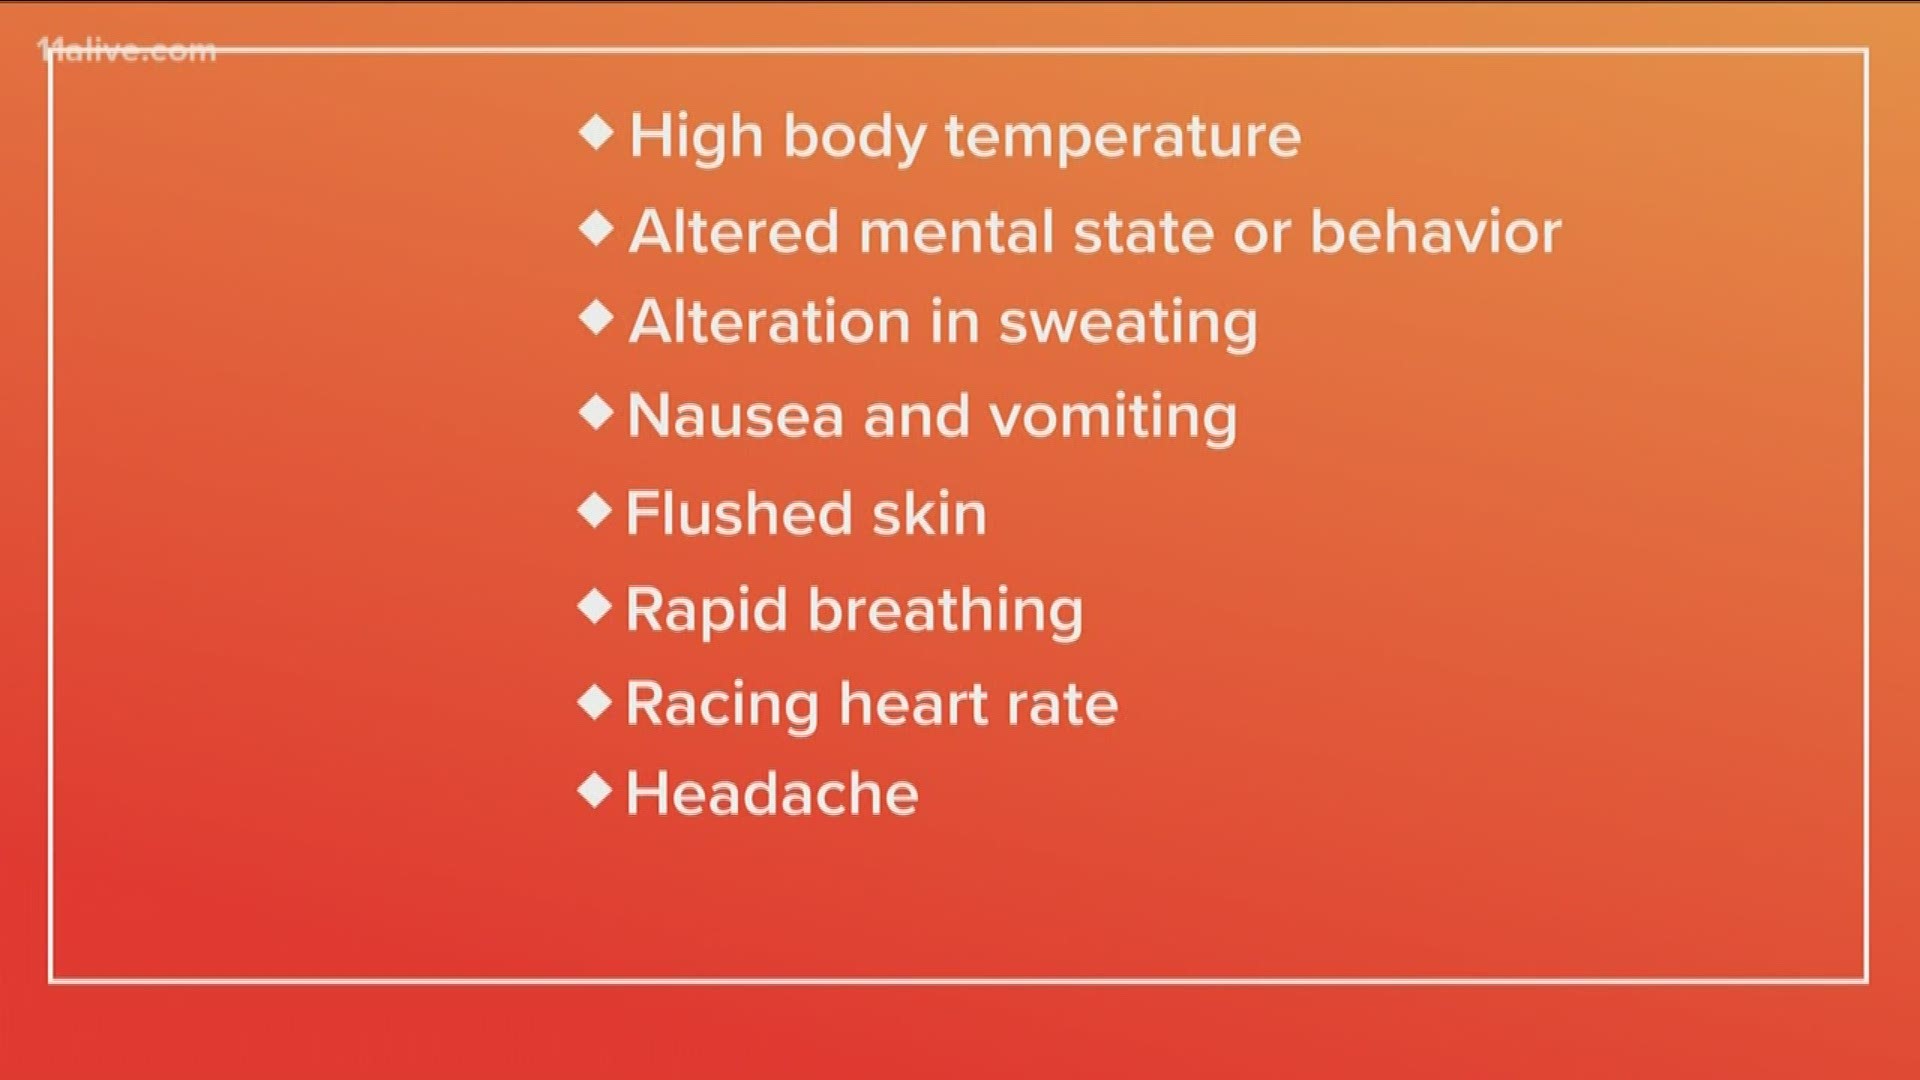 With the heat index values moving into the triple-digits, here is what everyone needs to know when it comes to watching for signs of heatstroke.